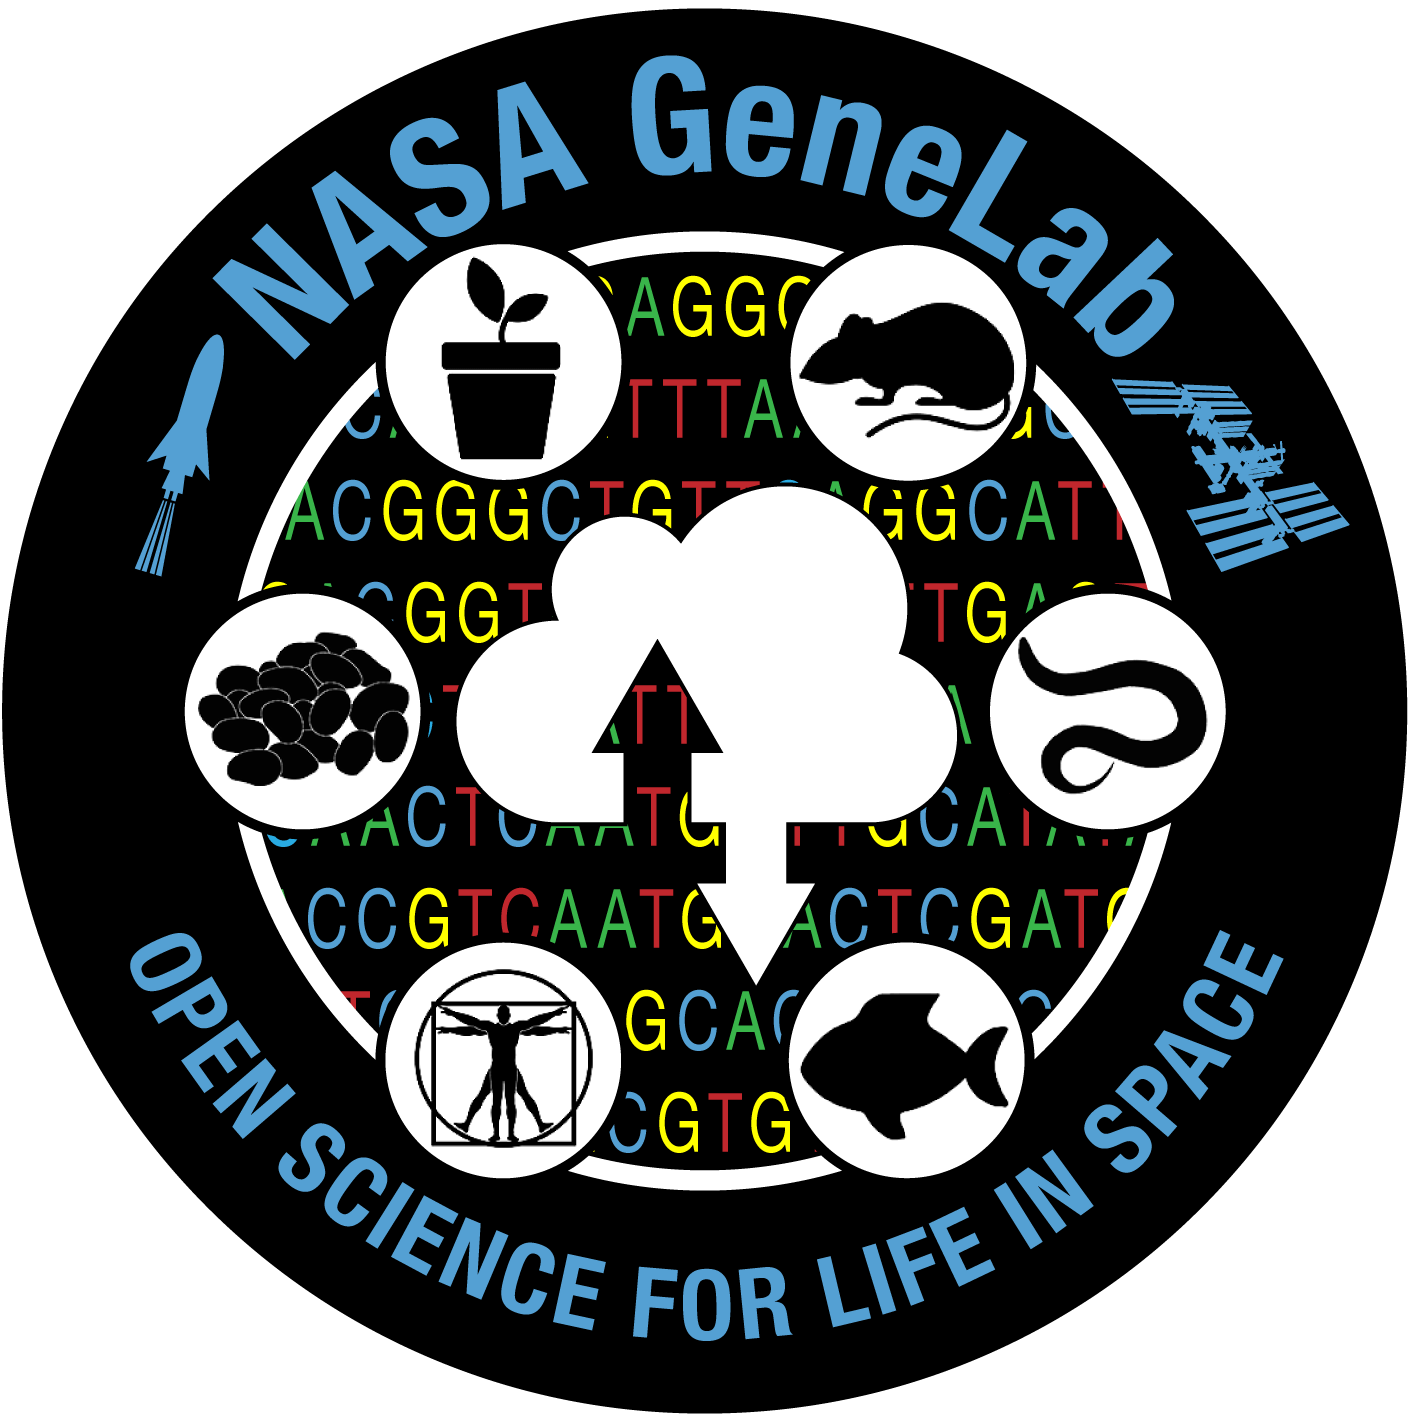 NASA GeneLab - Open Science for Life in Space